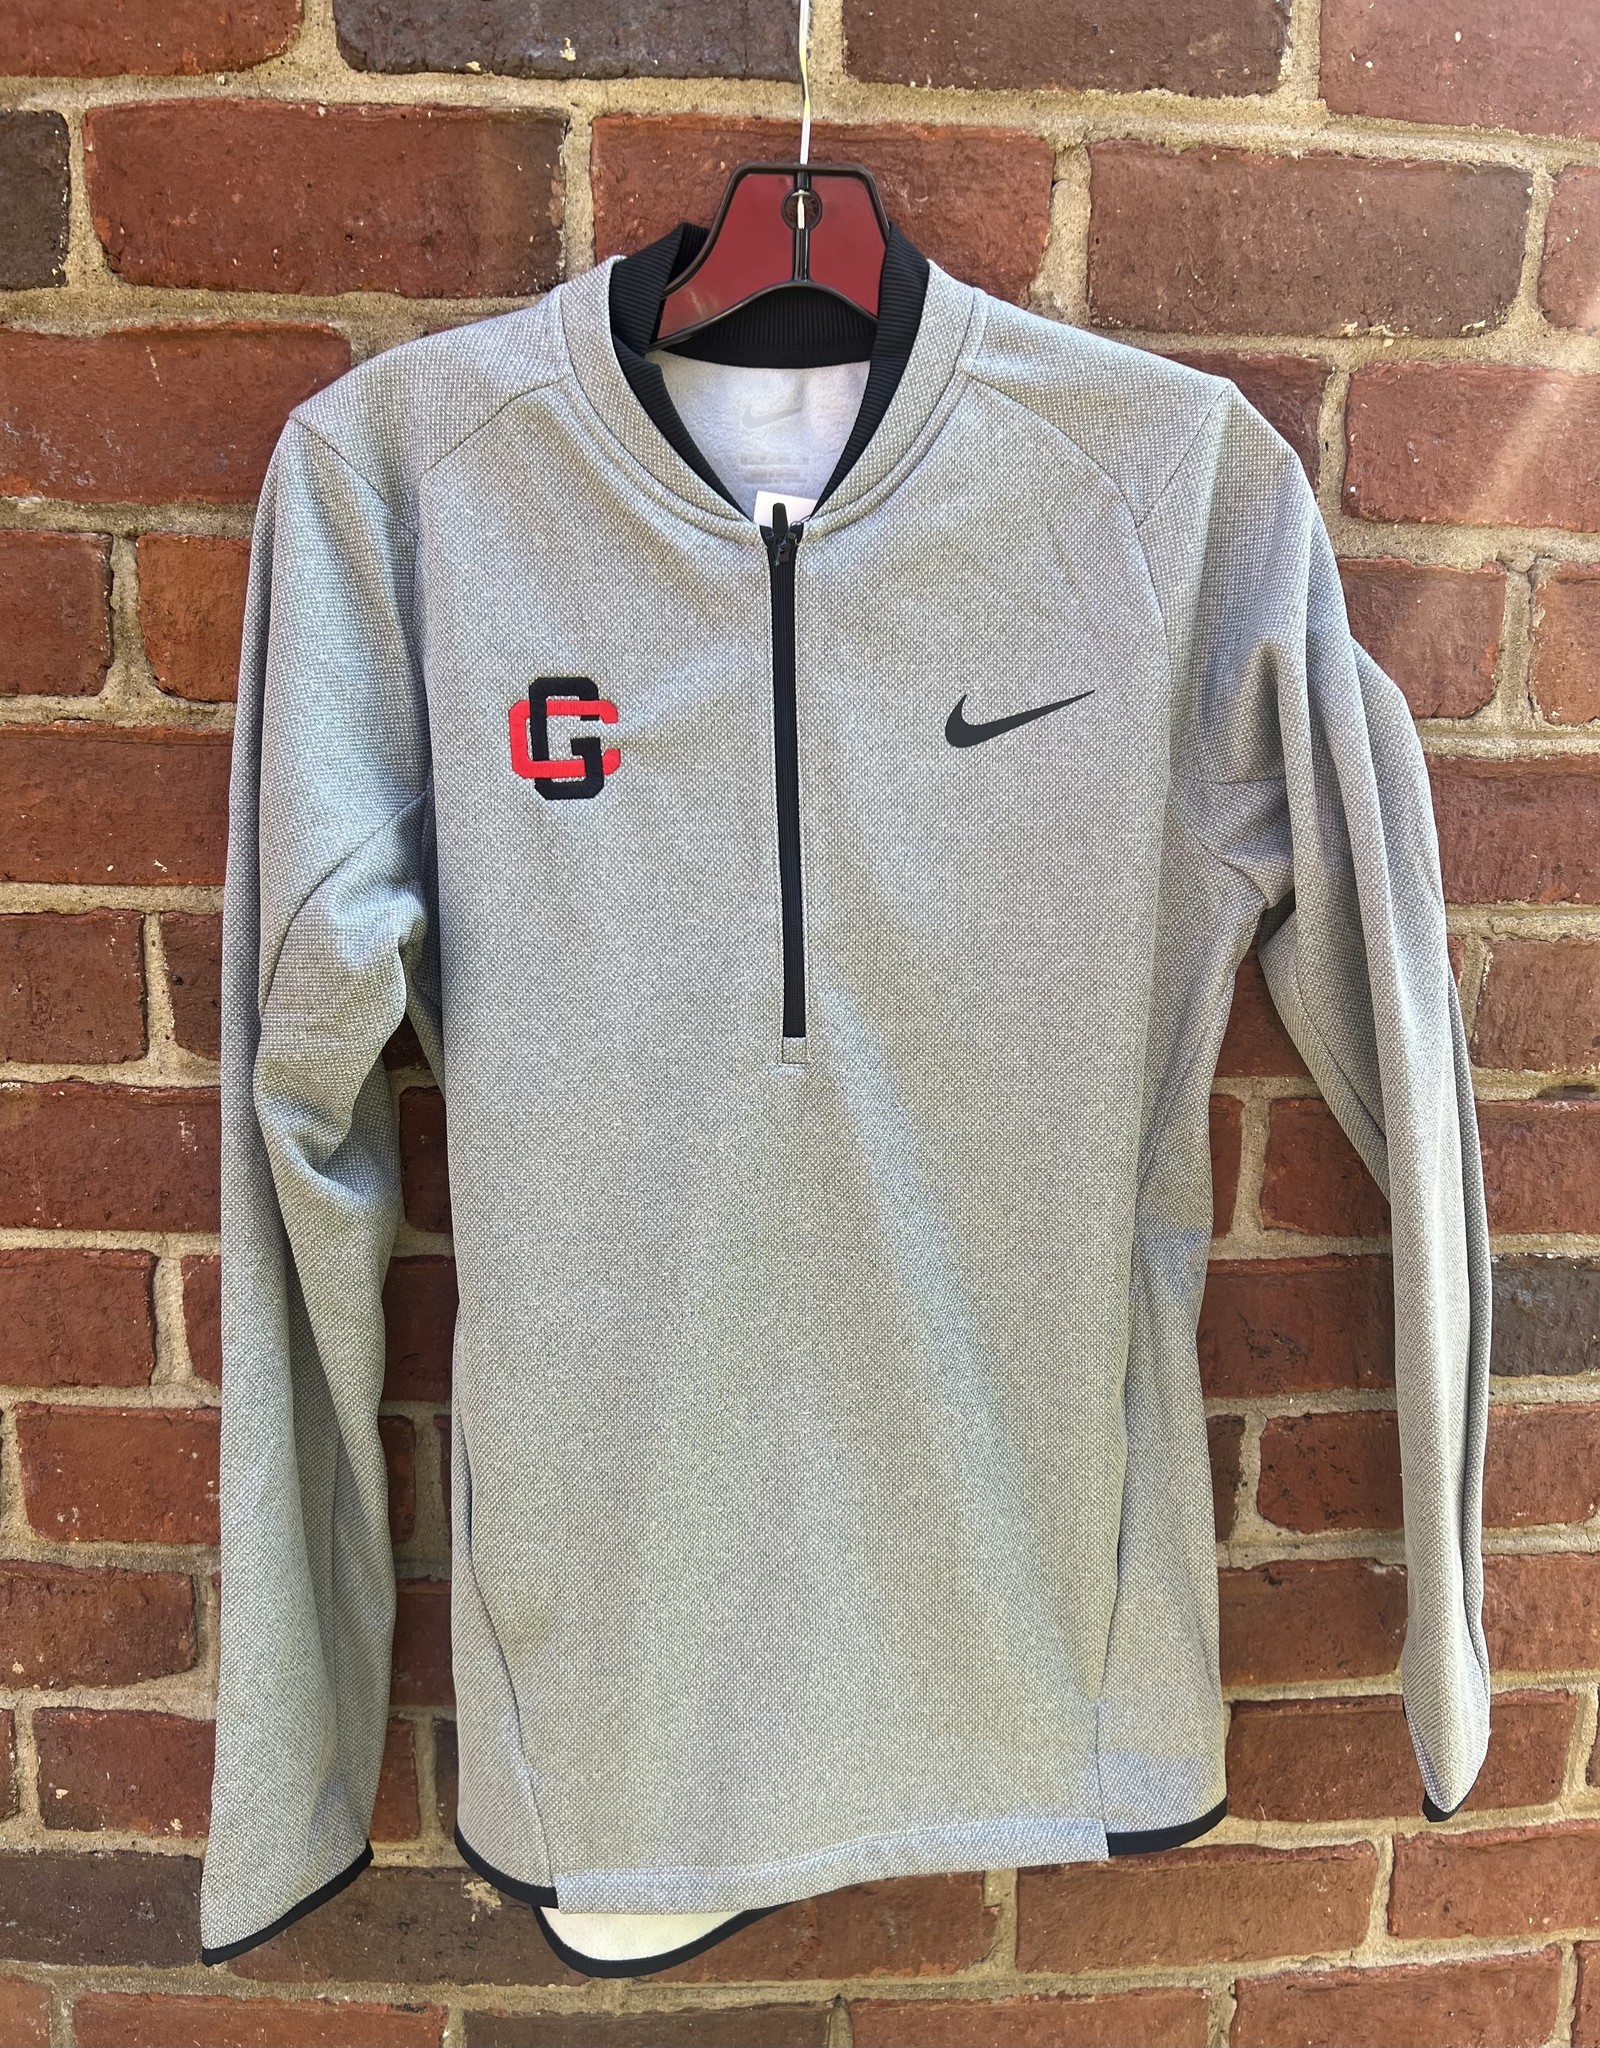 Nike Z Mens Nike Pinpoint 1/4 zip( XS ONLY)